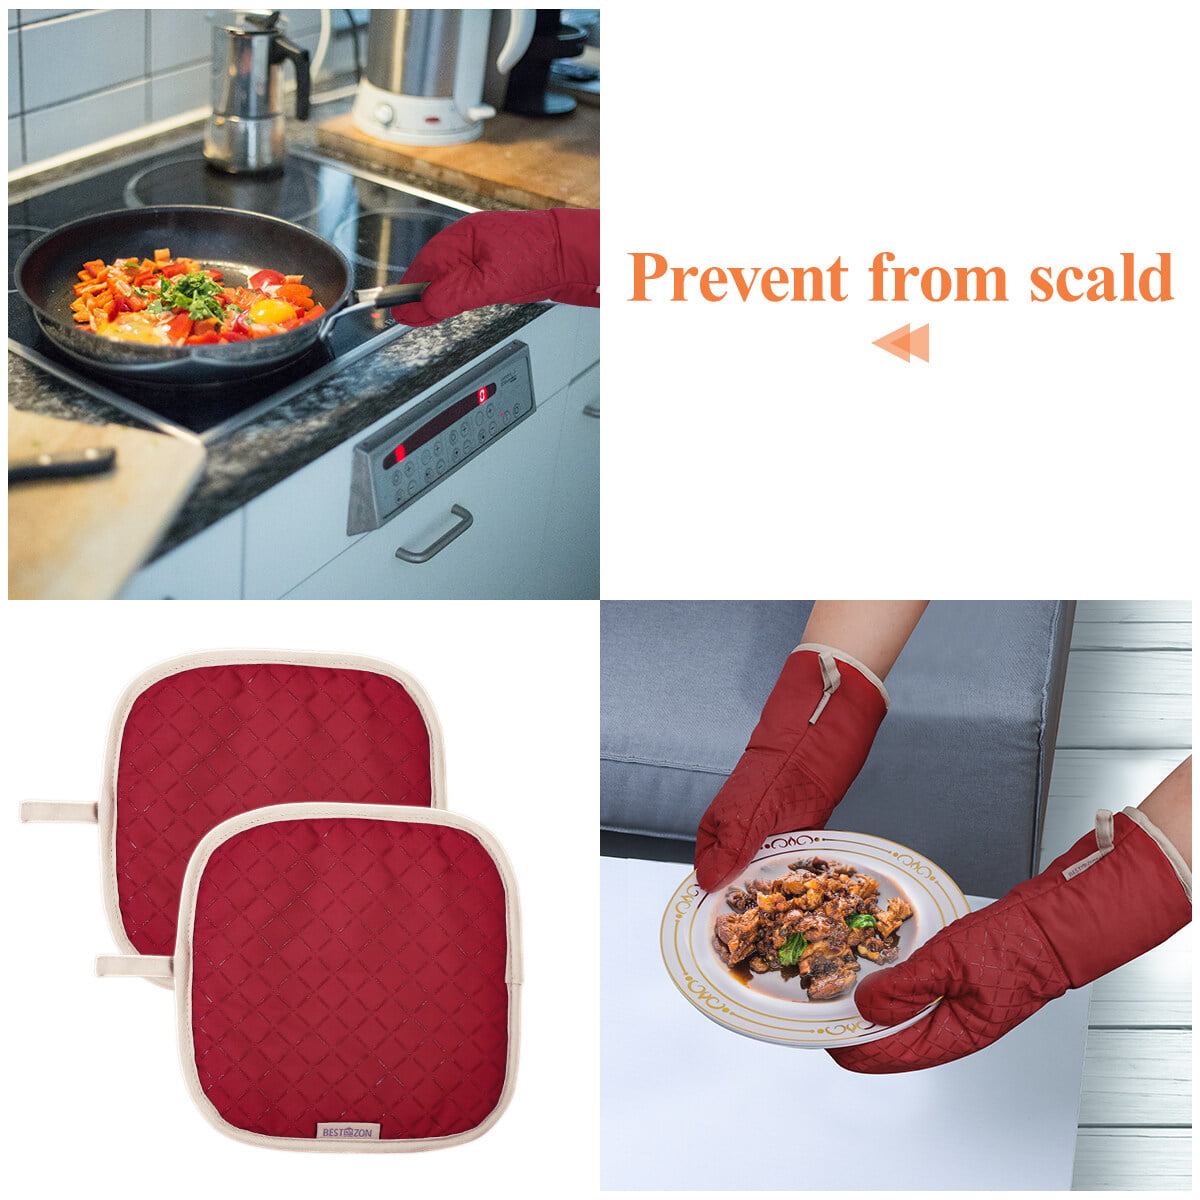 ARCLIBER 36x7.5 Double Oven Mitt Heat Resistant Potholder Double Oven  Glove for Handling Hot Pots Extra Long for Kitchen Cooking Baking